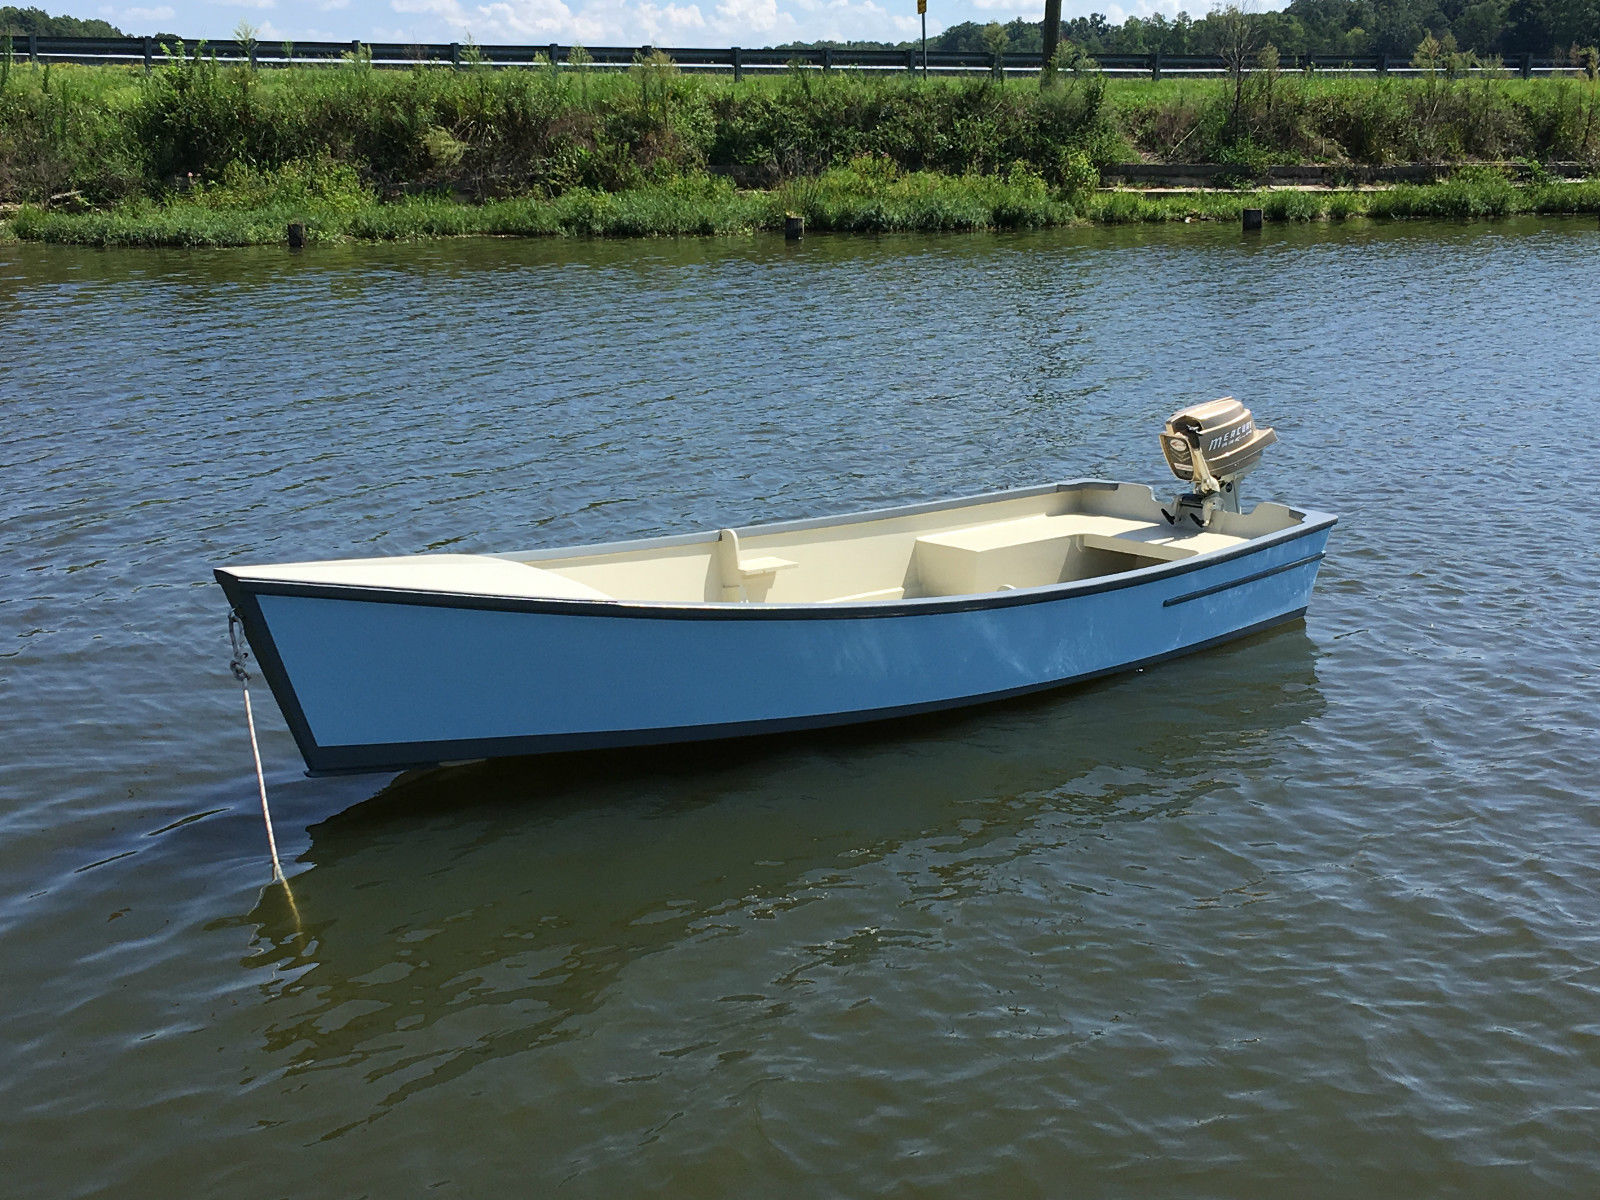 Harkers Island Skiff 1969 for sale for $2,000 - Boats-from ...